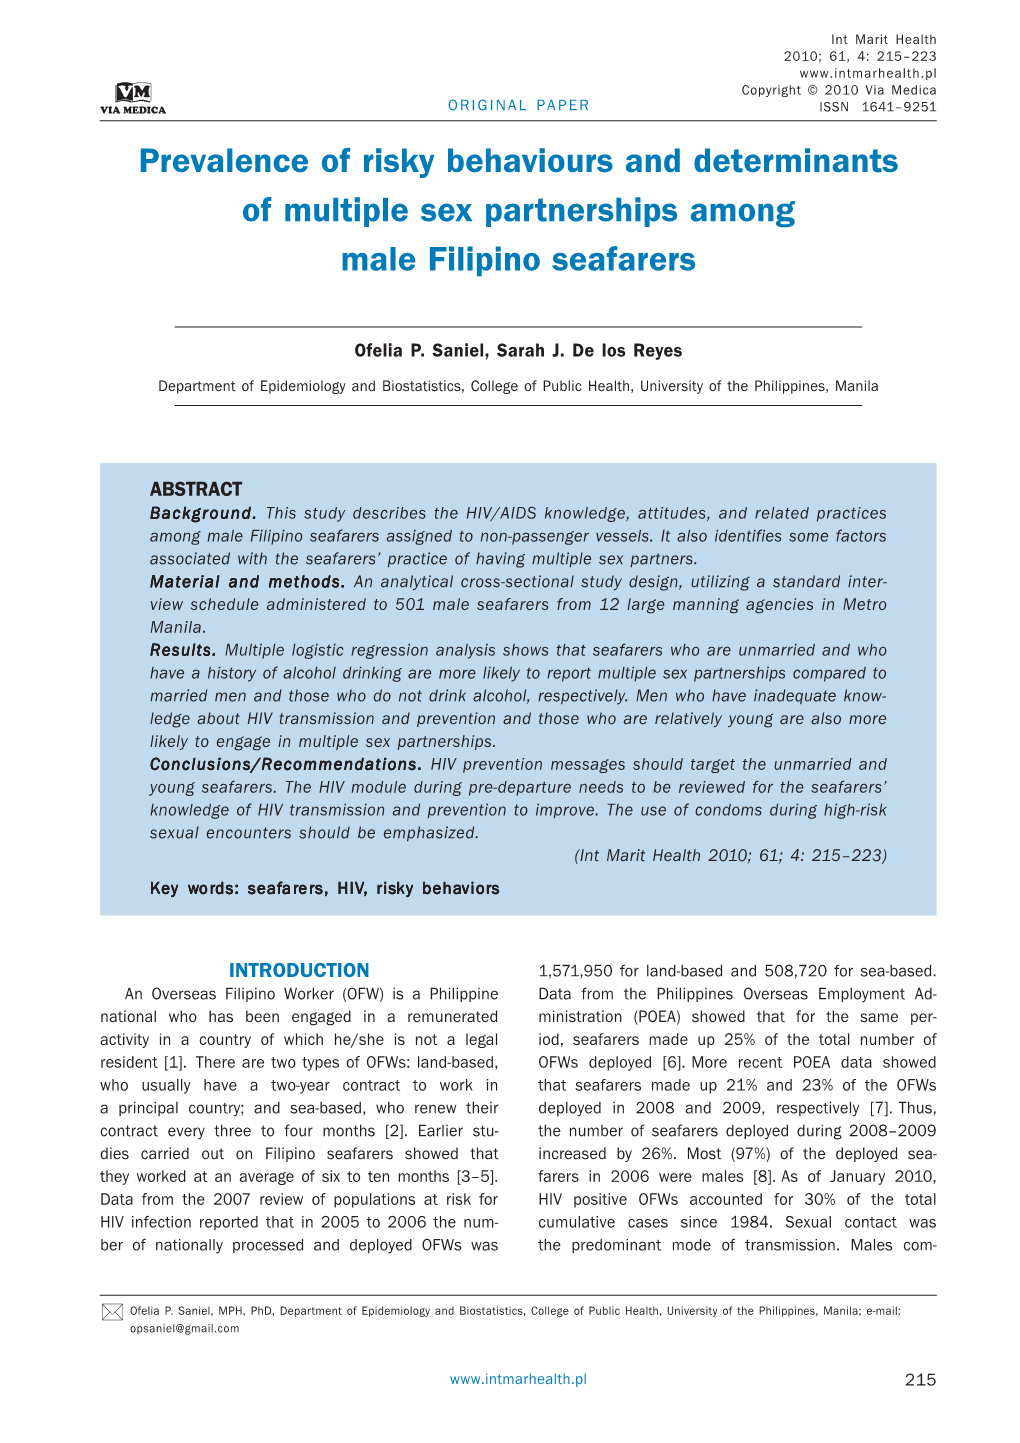 Prevalence of Risky Behaviours and Determinants of Multiple Sex Partnerships Among Male Filipino Seafarers